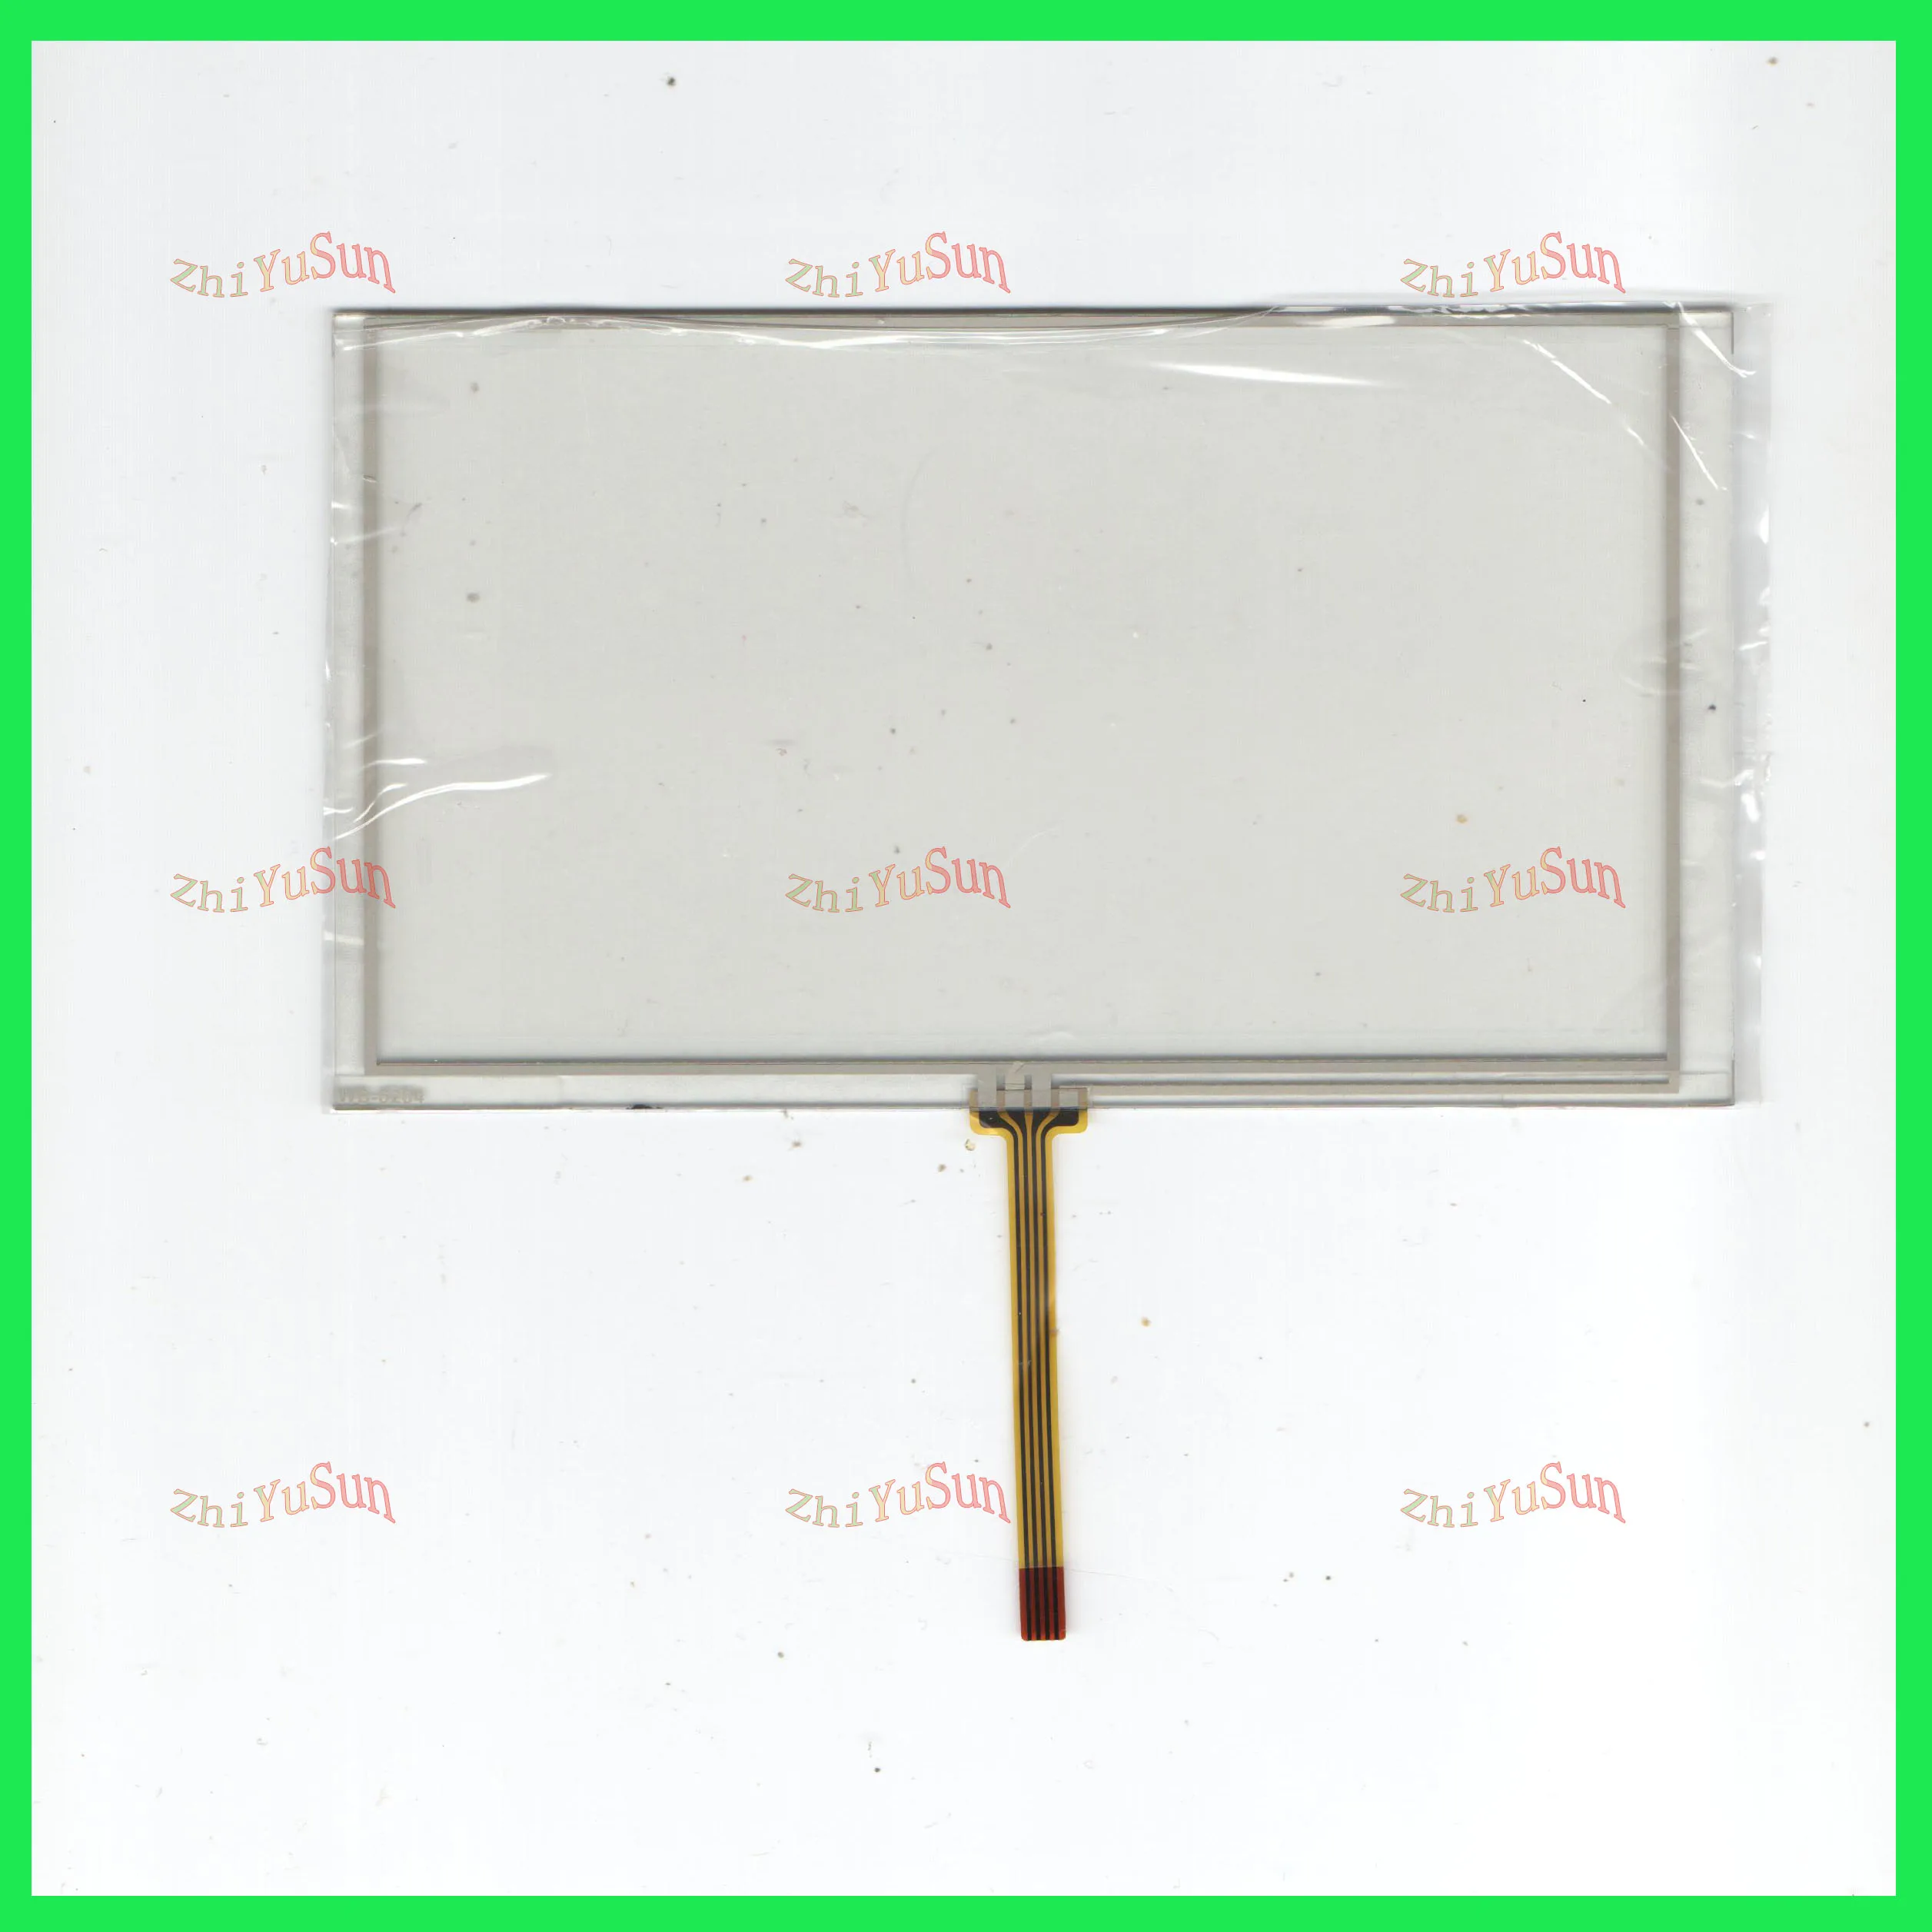 

HSTTPA7.0HJ compatible touchglass 4lines resistance screen this is compatible Touchsensor HST-TPA7.0HJ